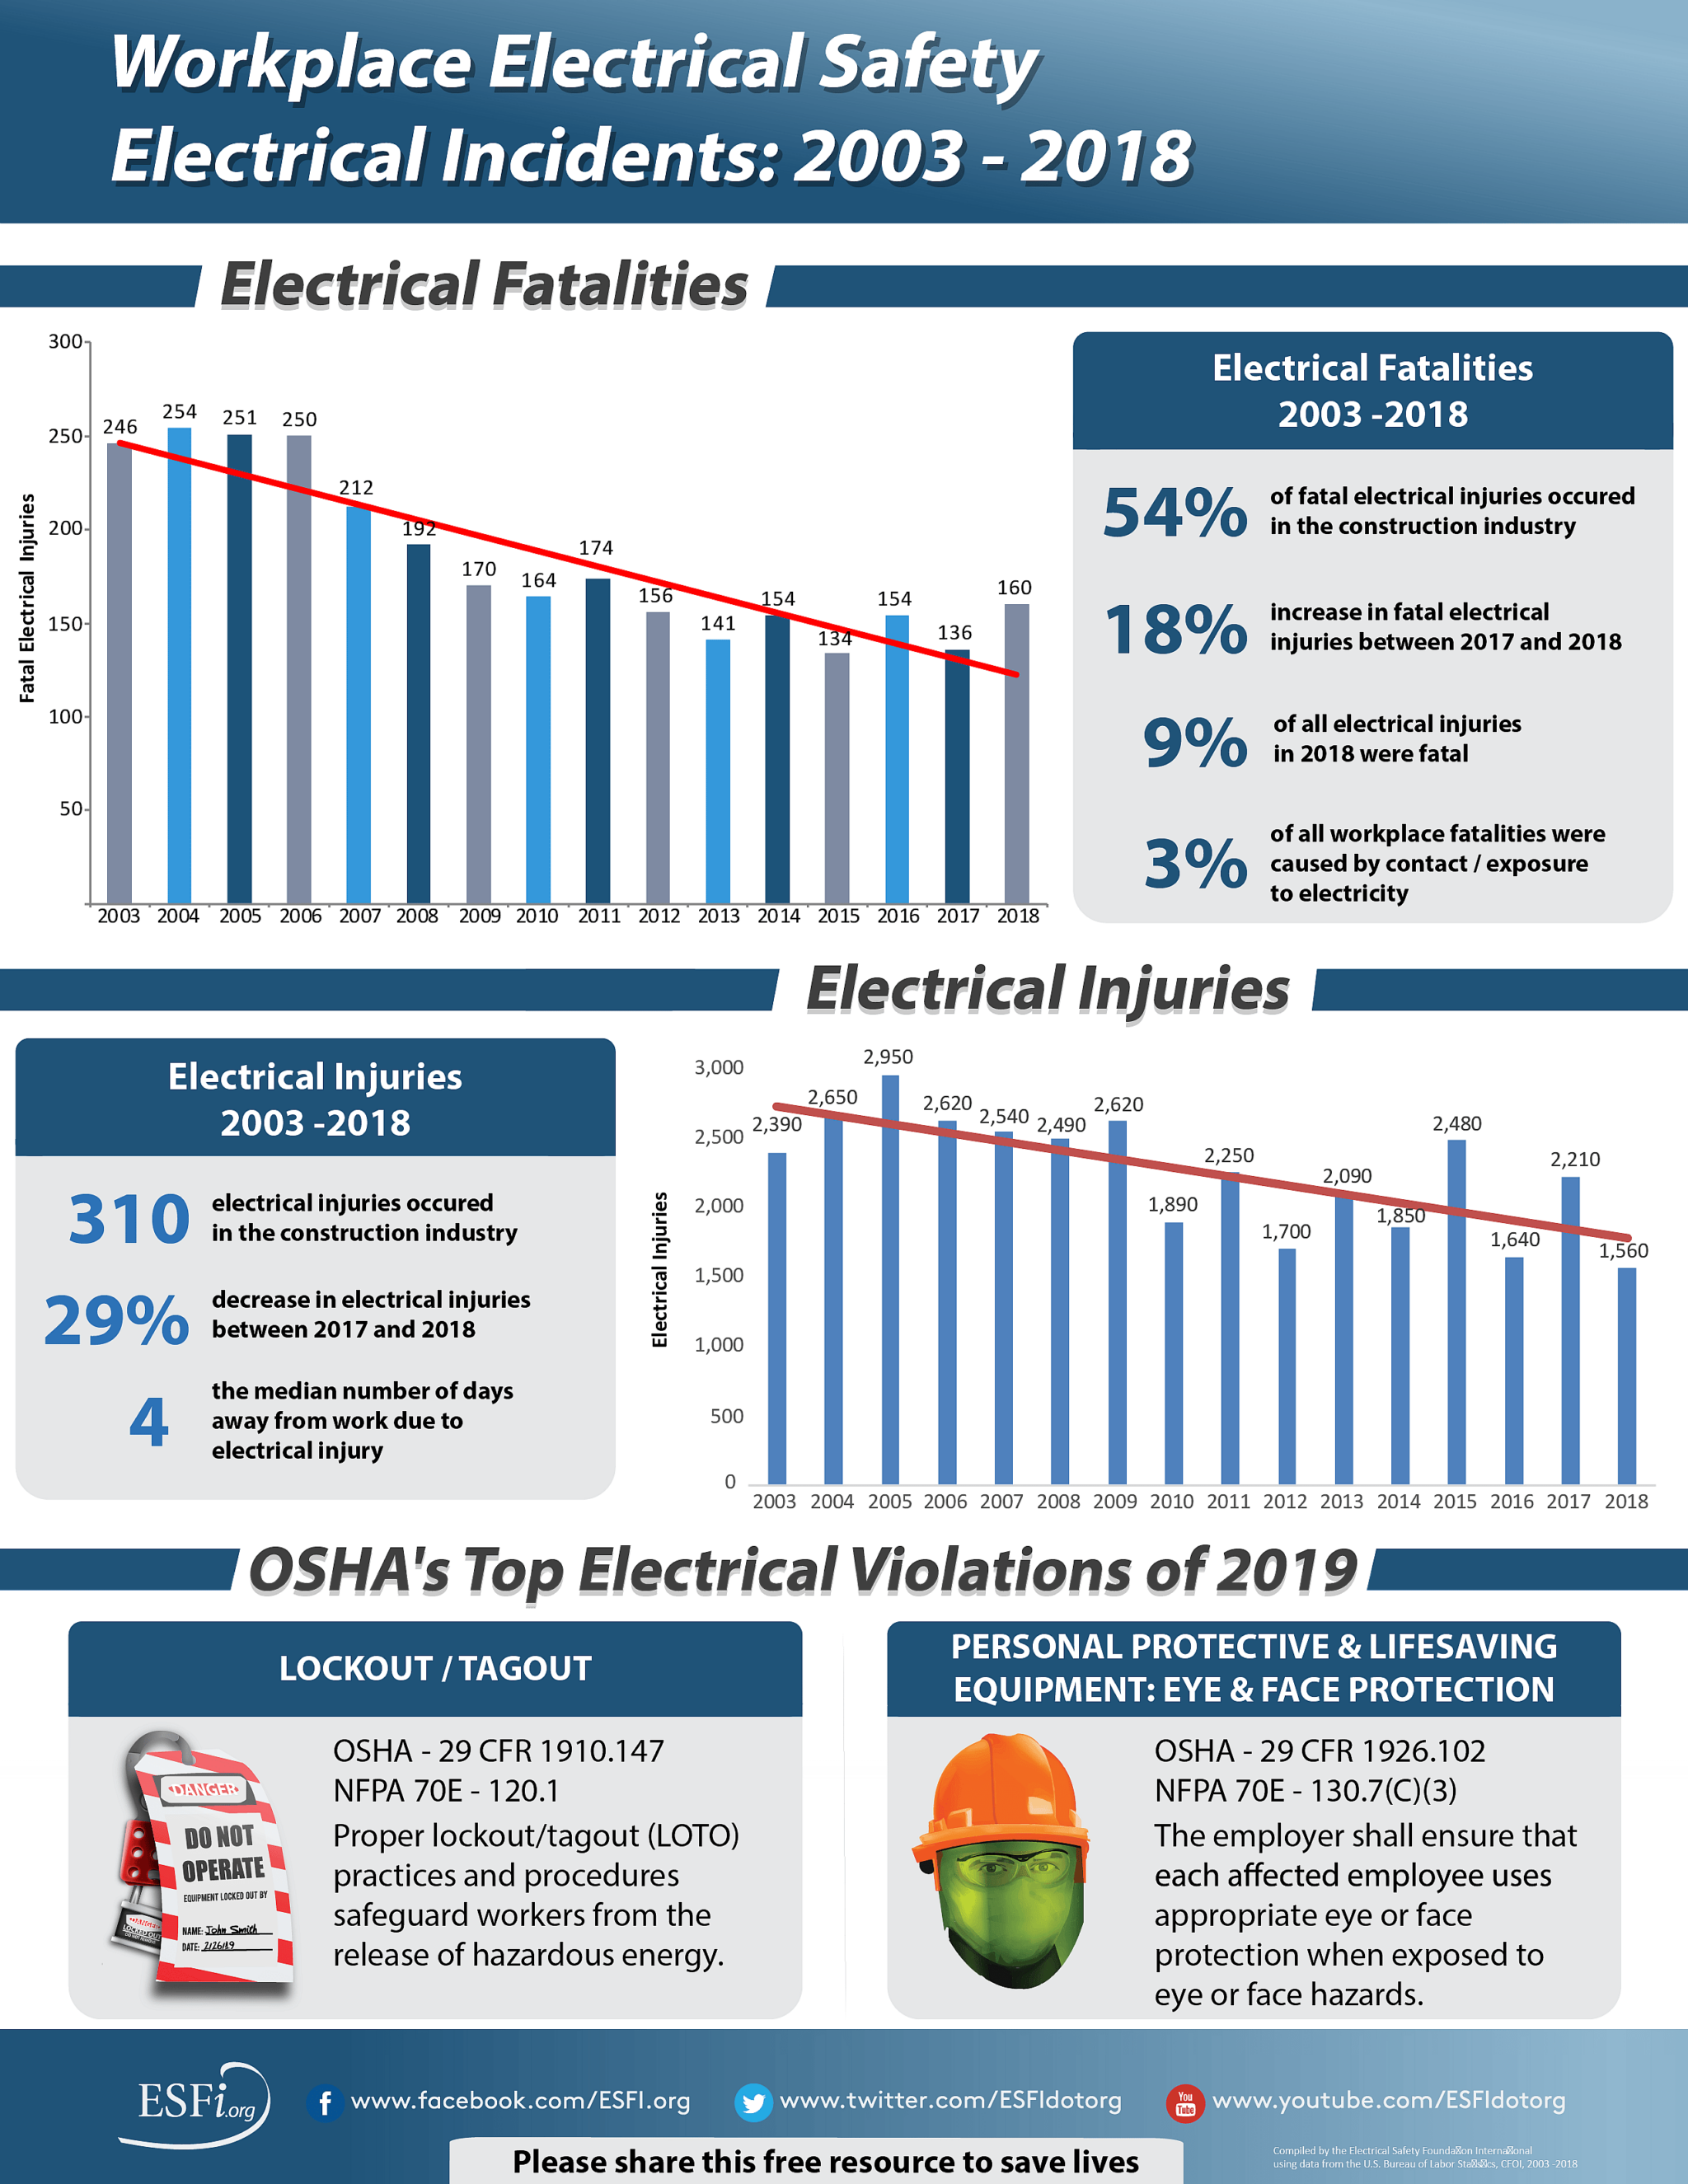 Workplace electrical safety trends highlighting construction site safety rules